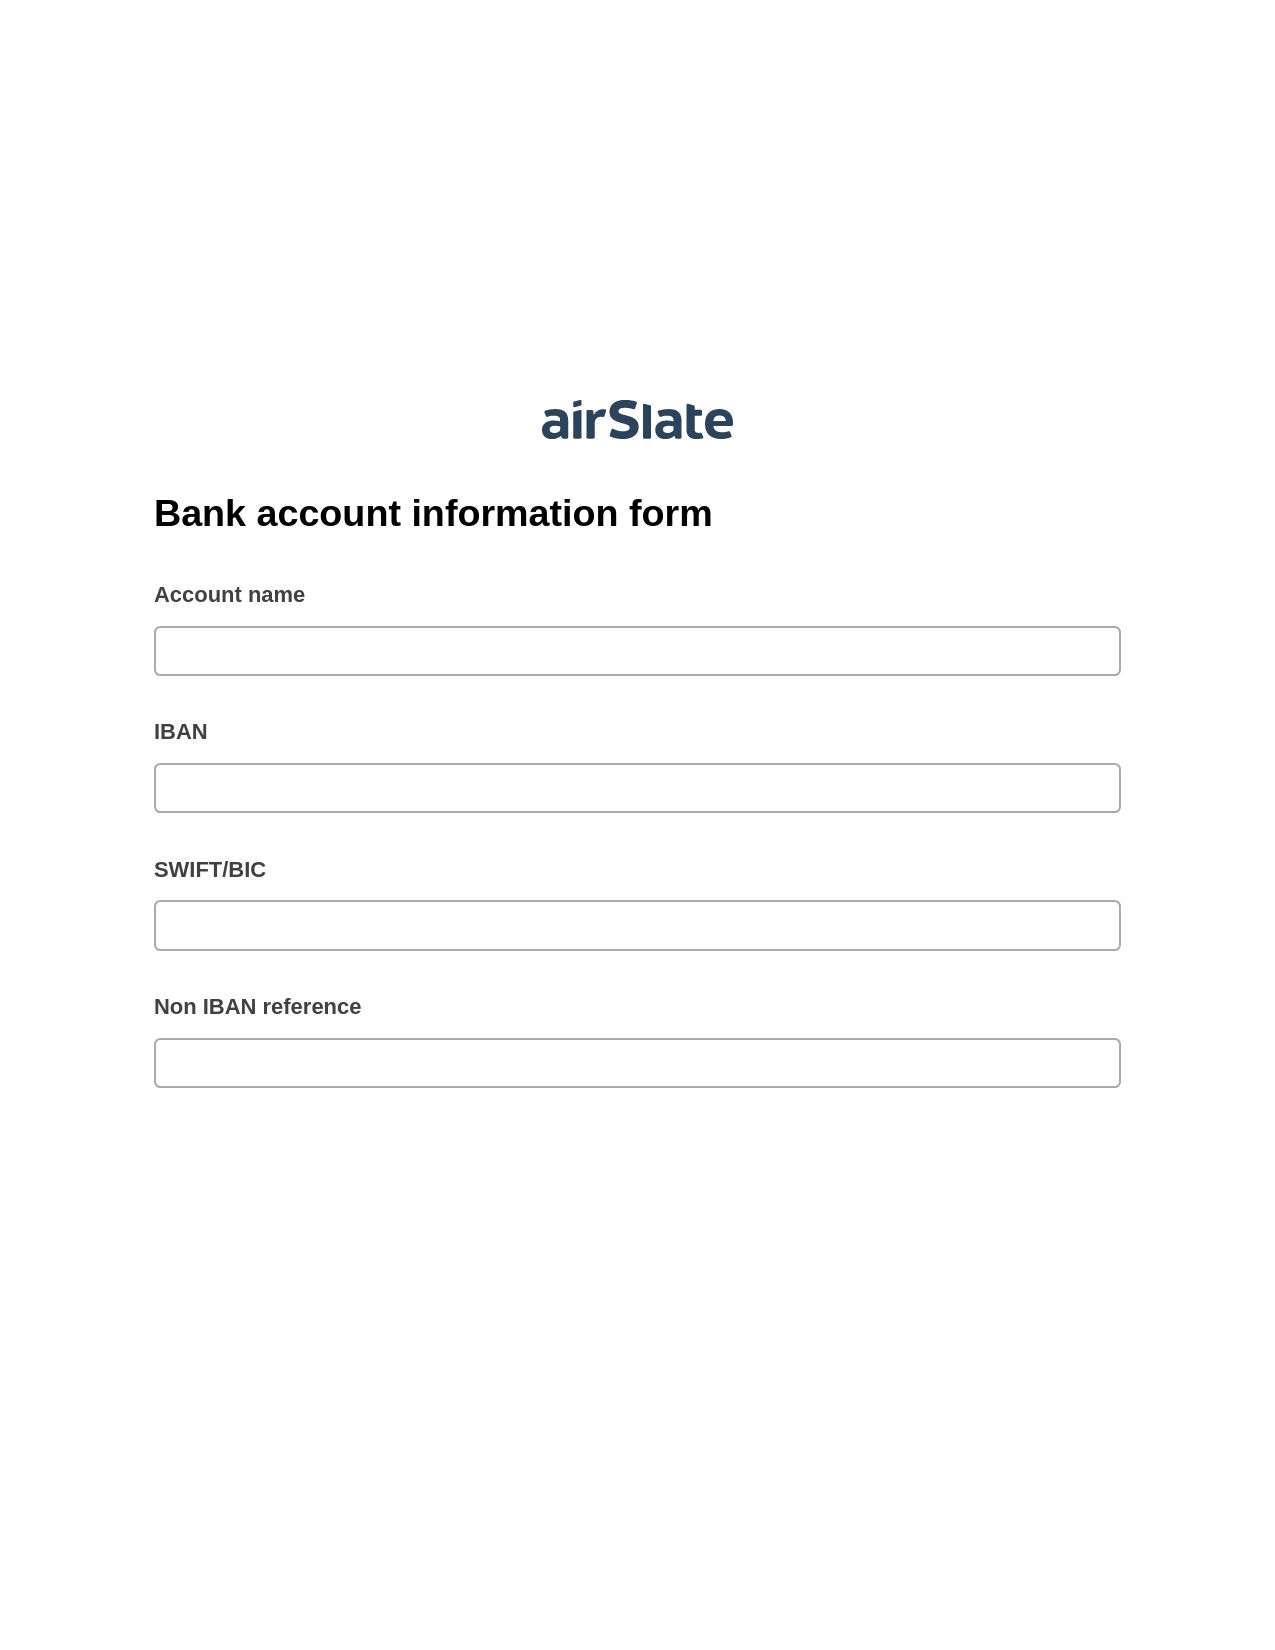 Bank account information form Pre-fill Slate from MS Dynamics 365 Records Bot, Roles Reminder Bot, Archive to SharePoint Folder Bot